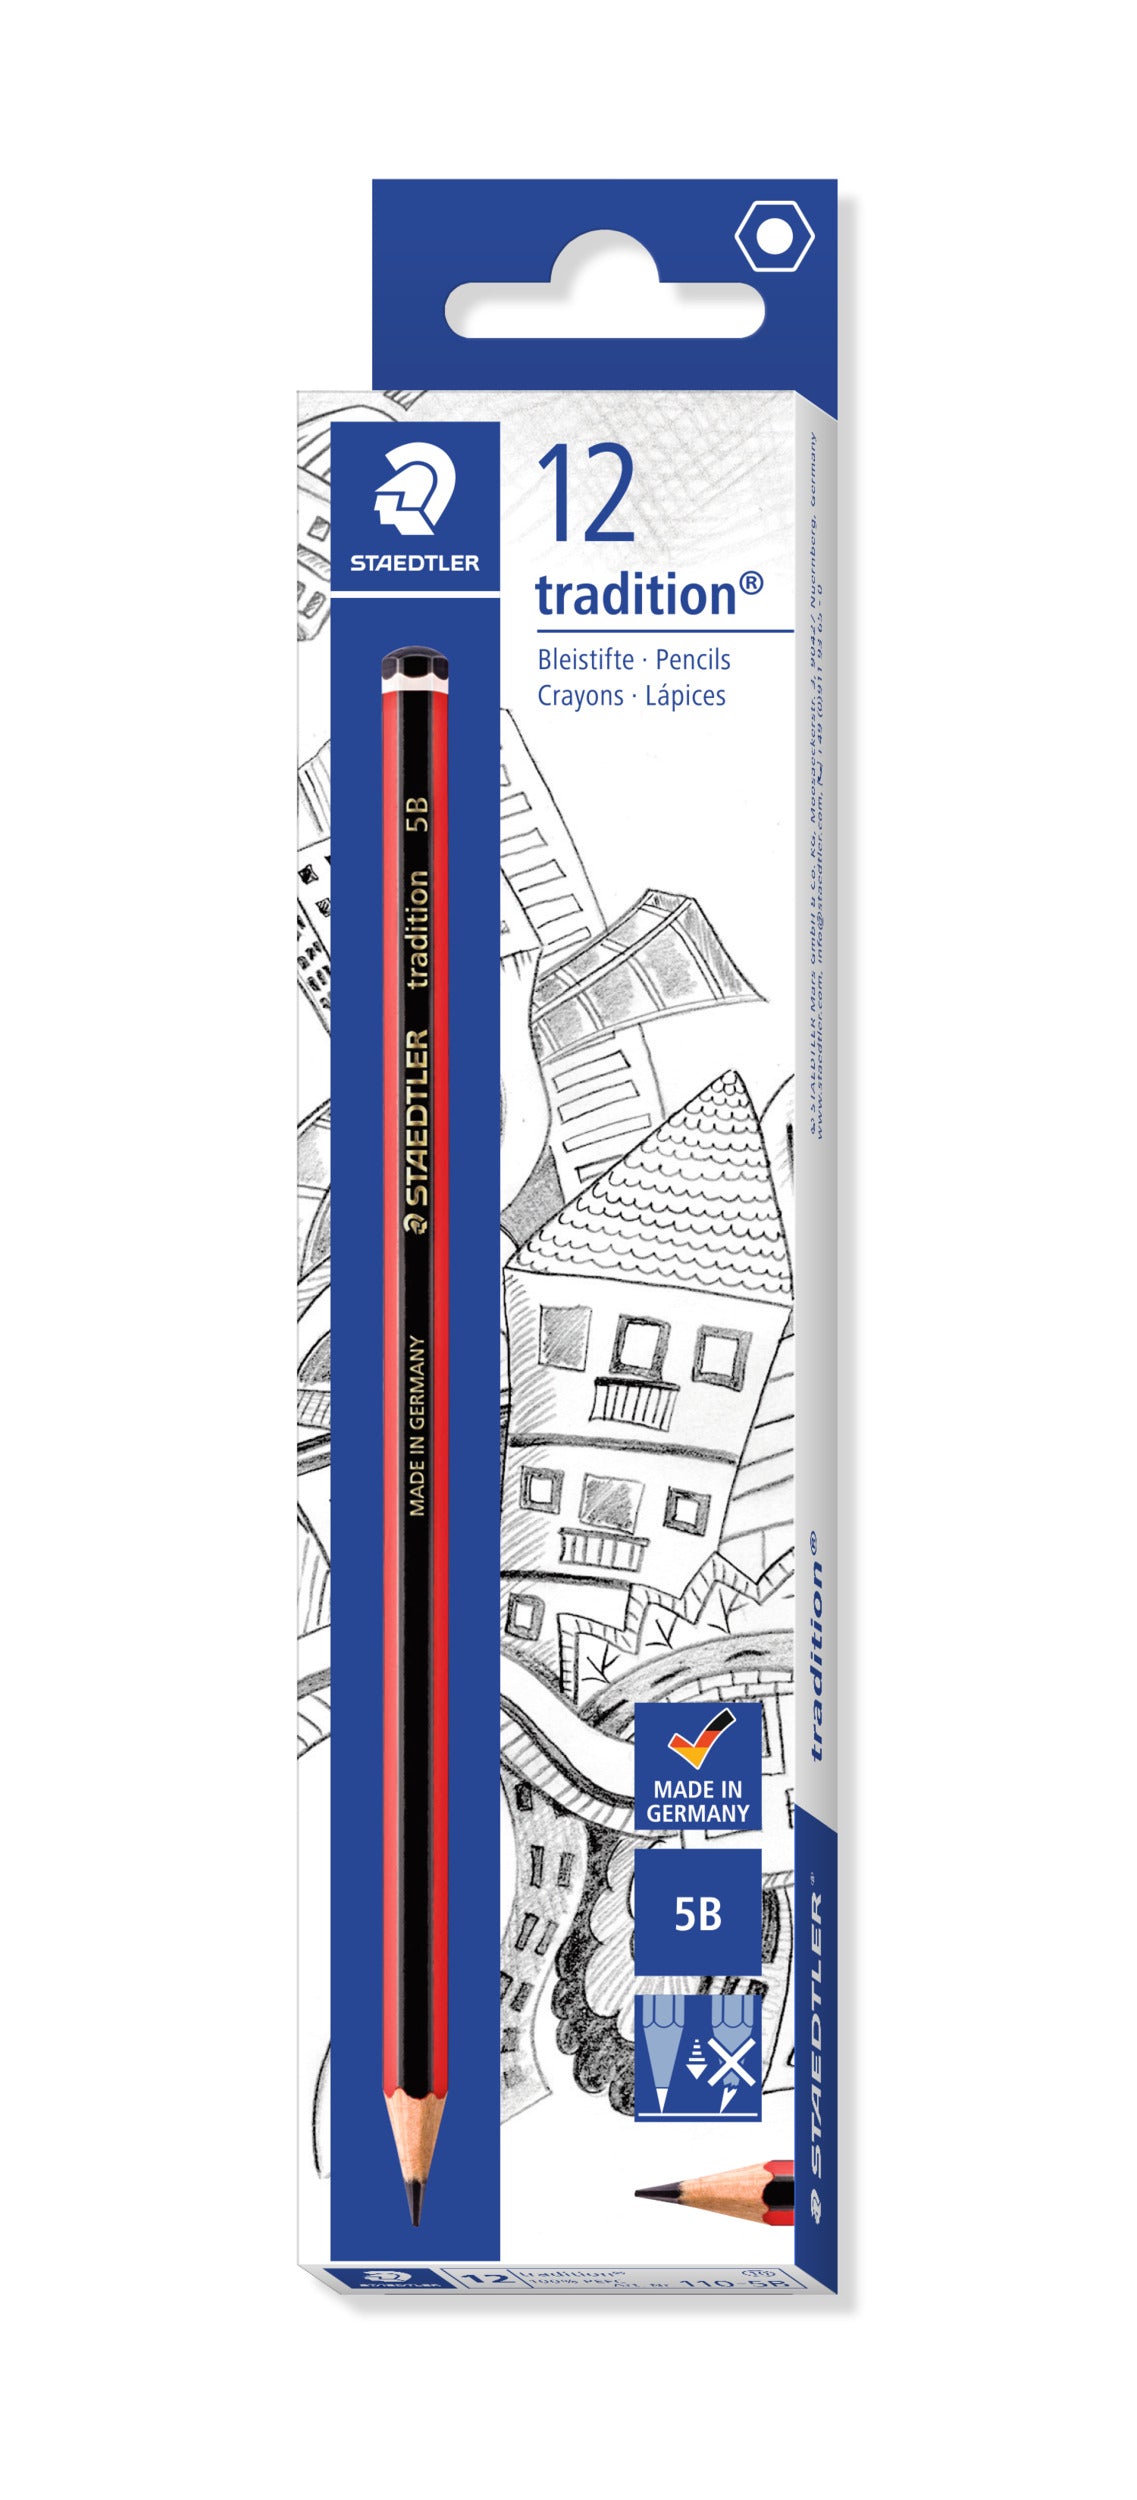 Staedtler Tradition 110-5B Pencil 5B Box of 12